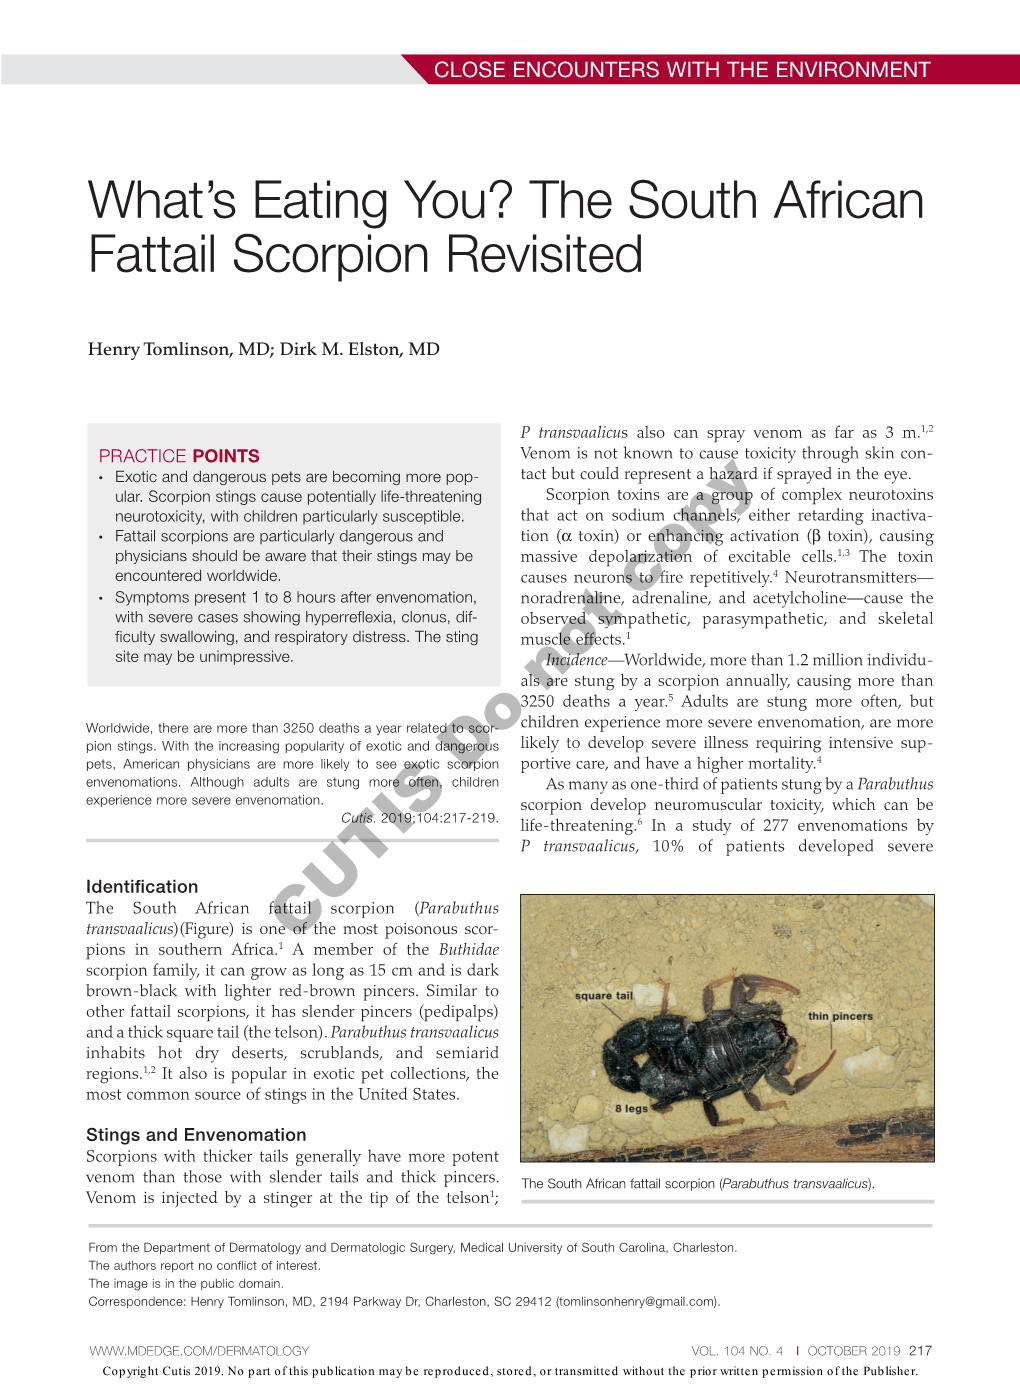 The South African Fattail Scorpion Revisited